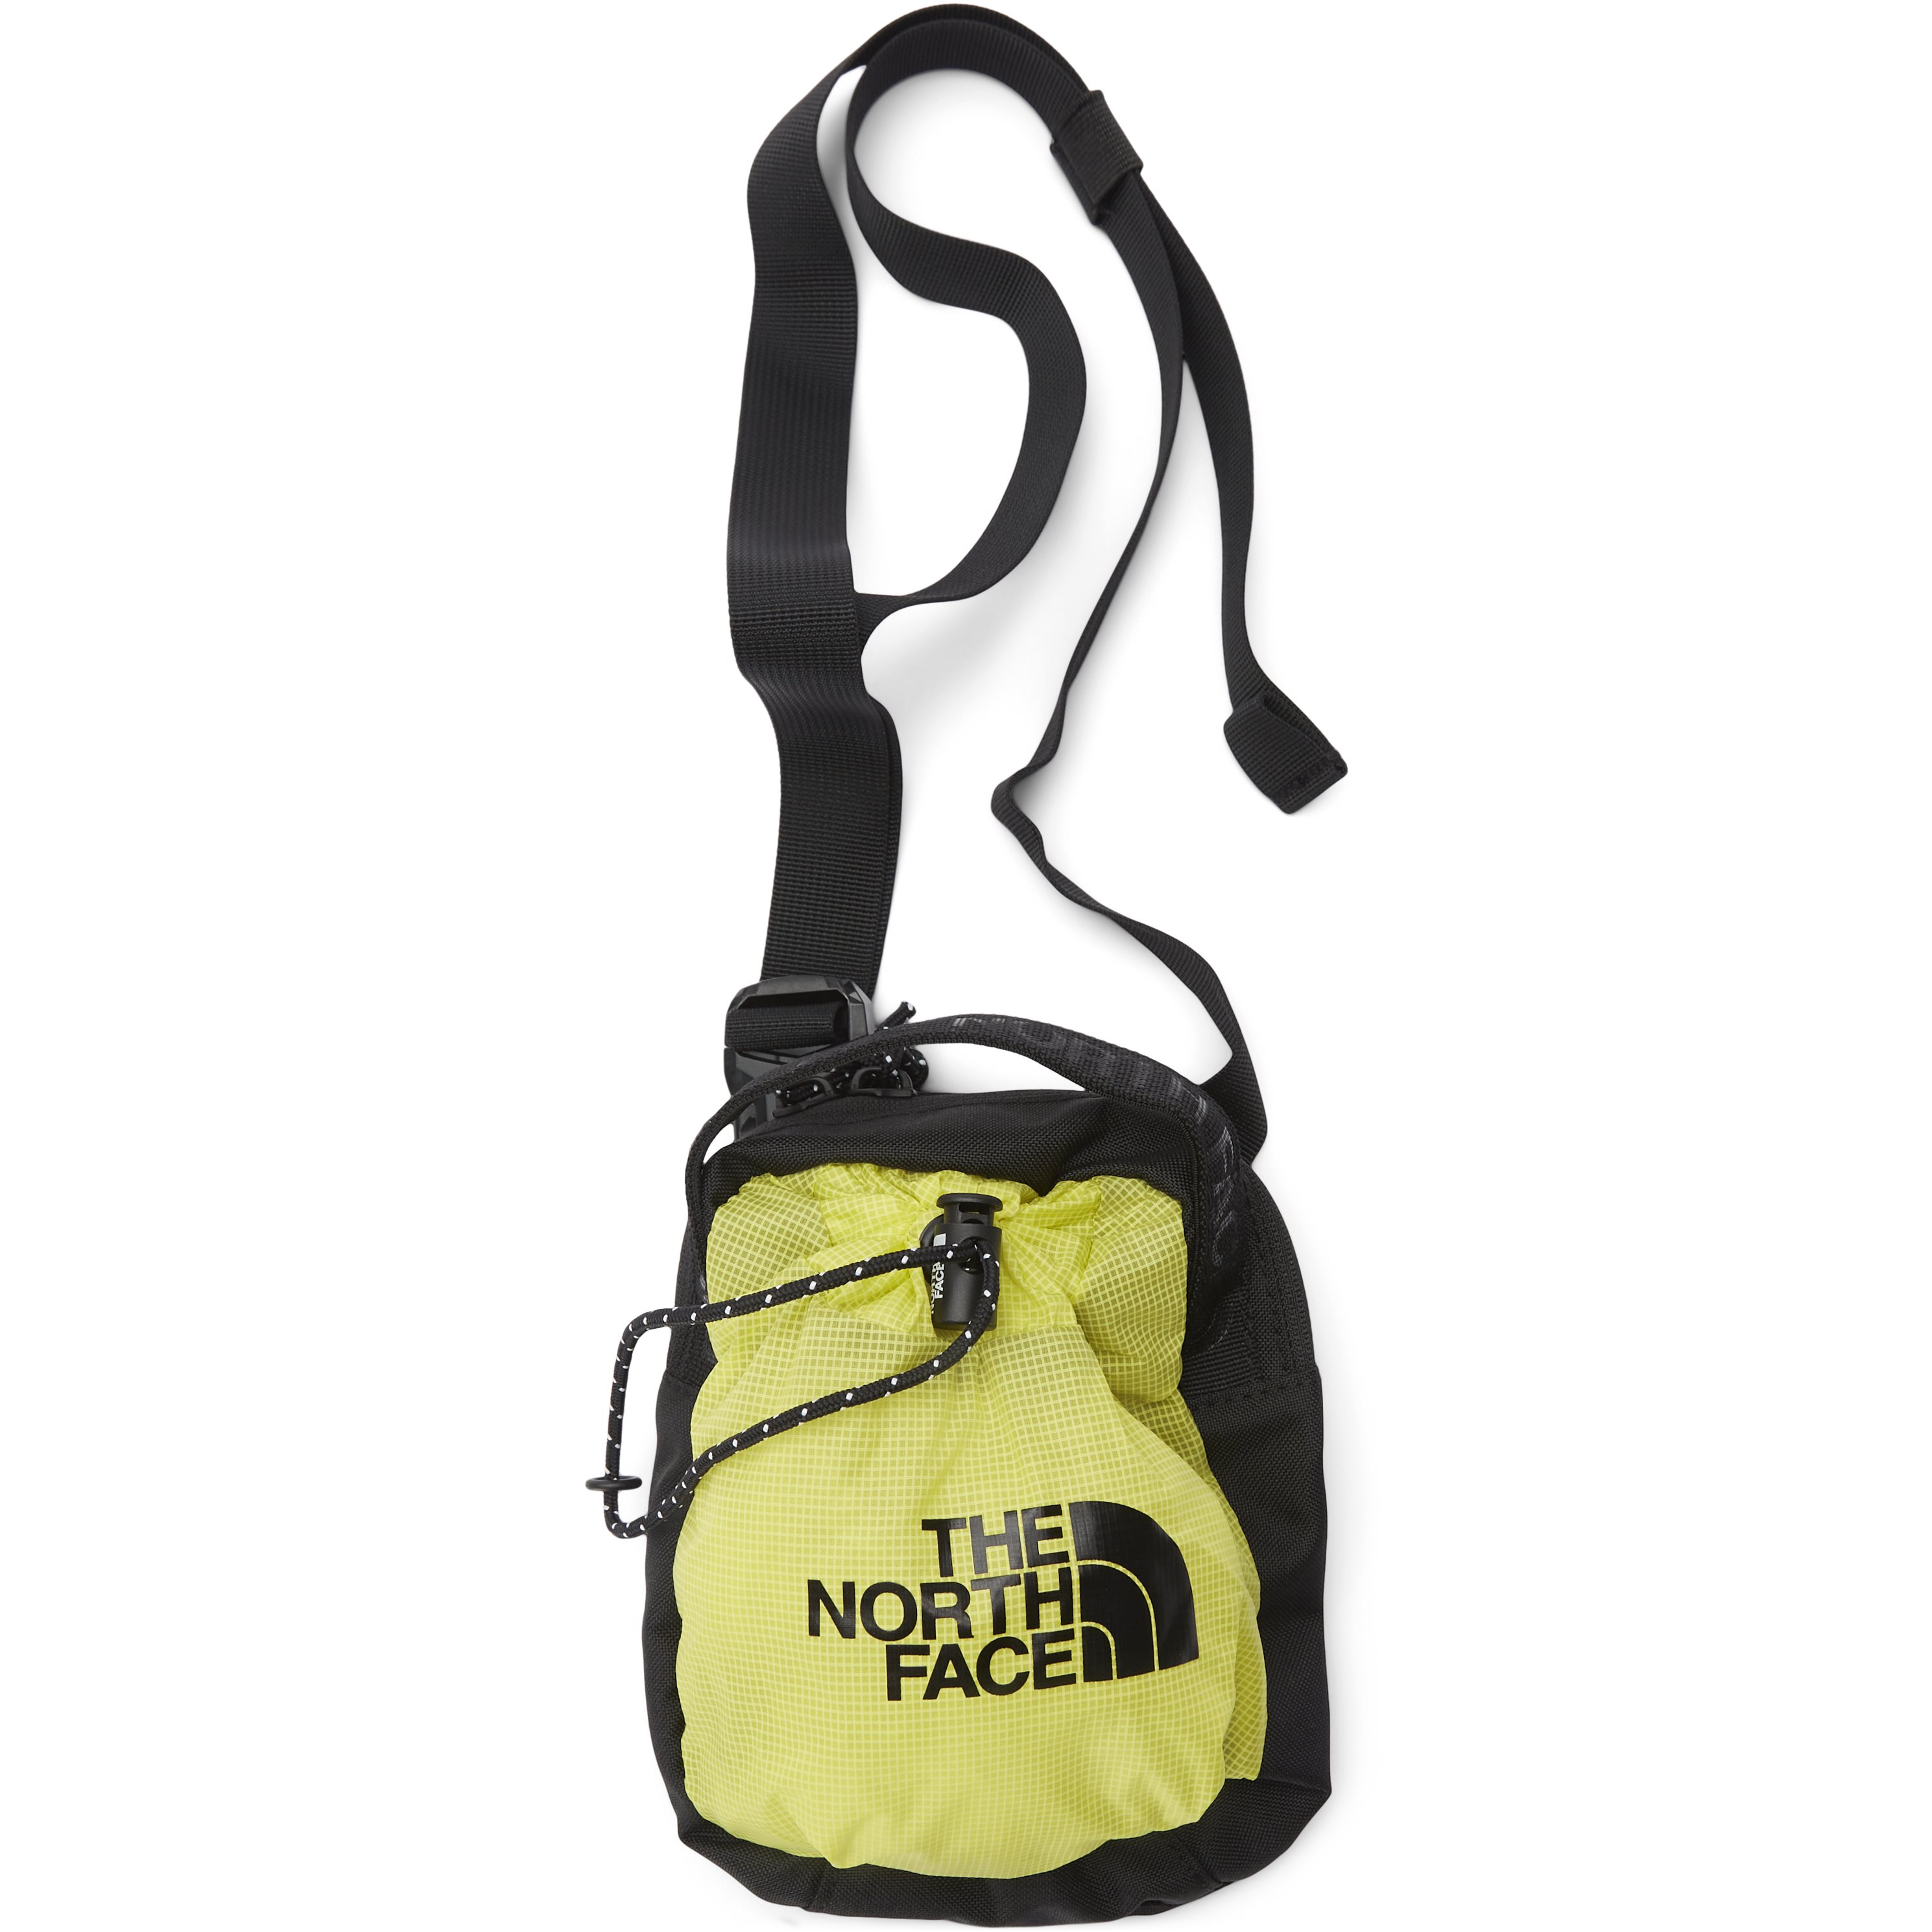 The North Face Bags BOZER CROSS BODY NF0A52RY Yellow